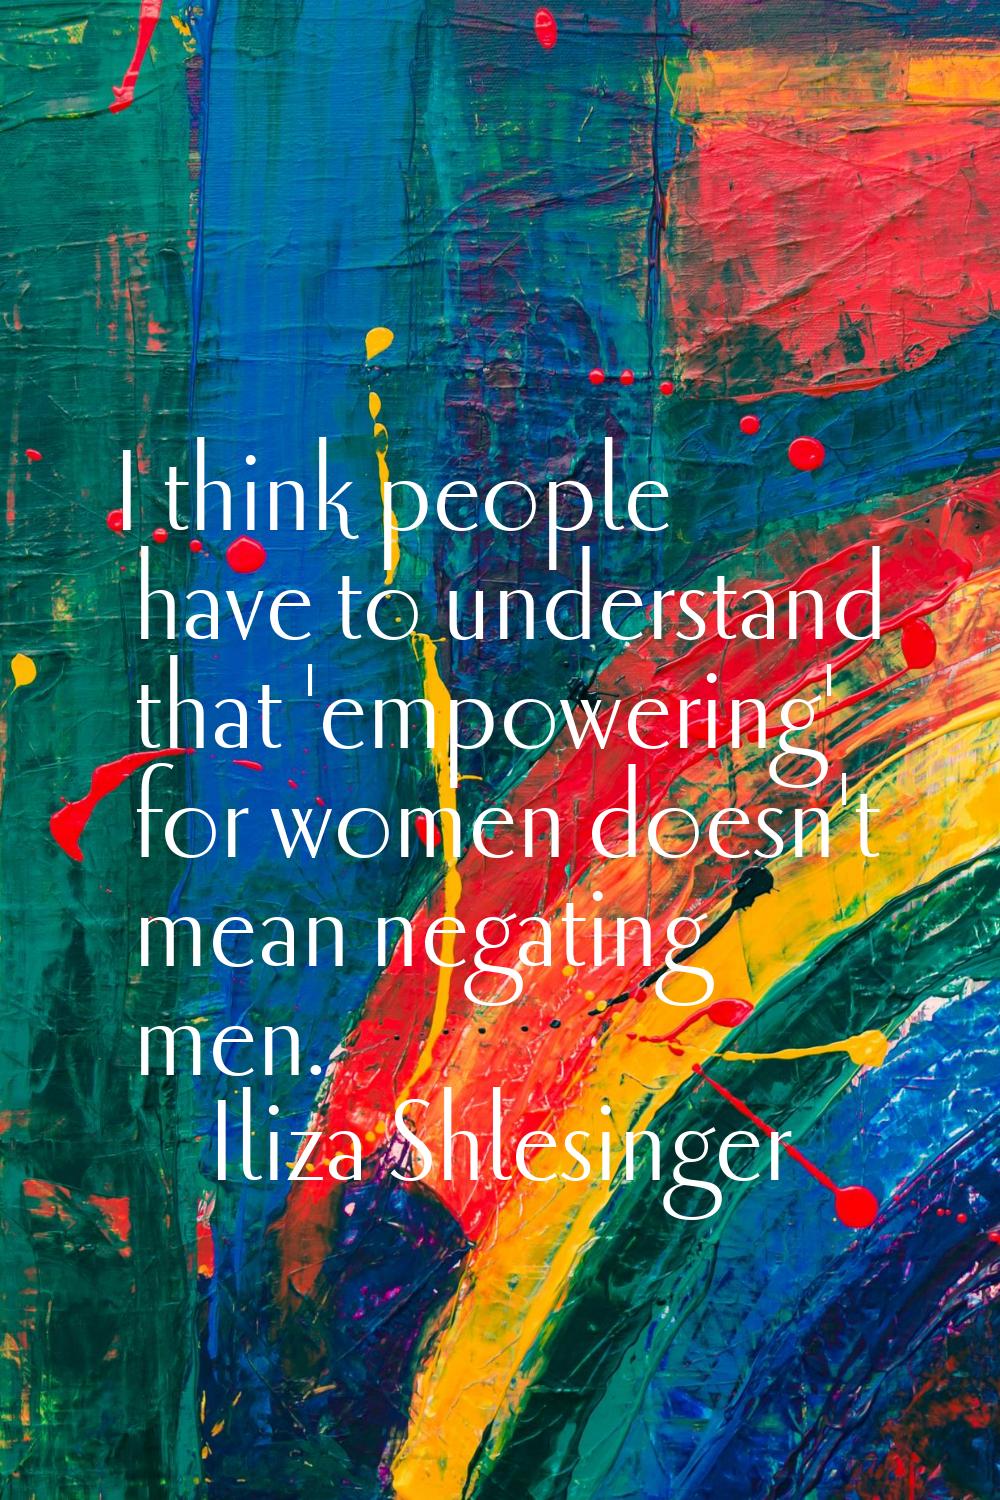 I think people have to understand that 'empowering' for women doesn't mean negating men.